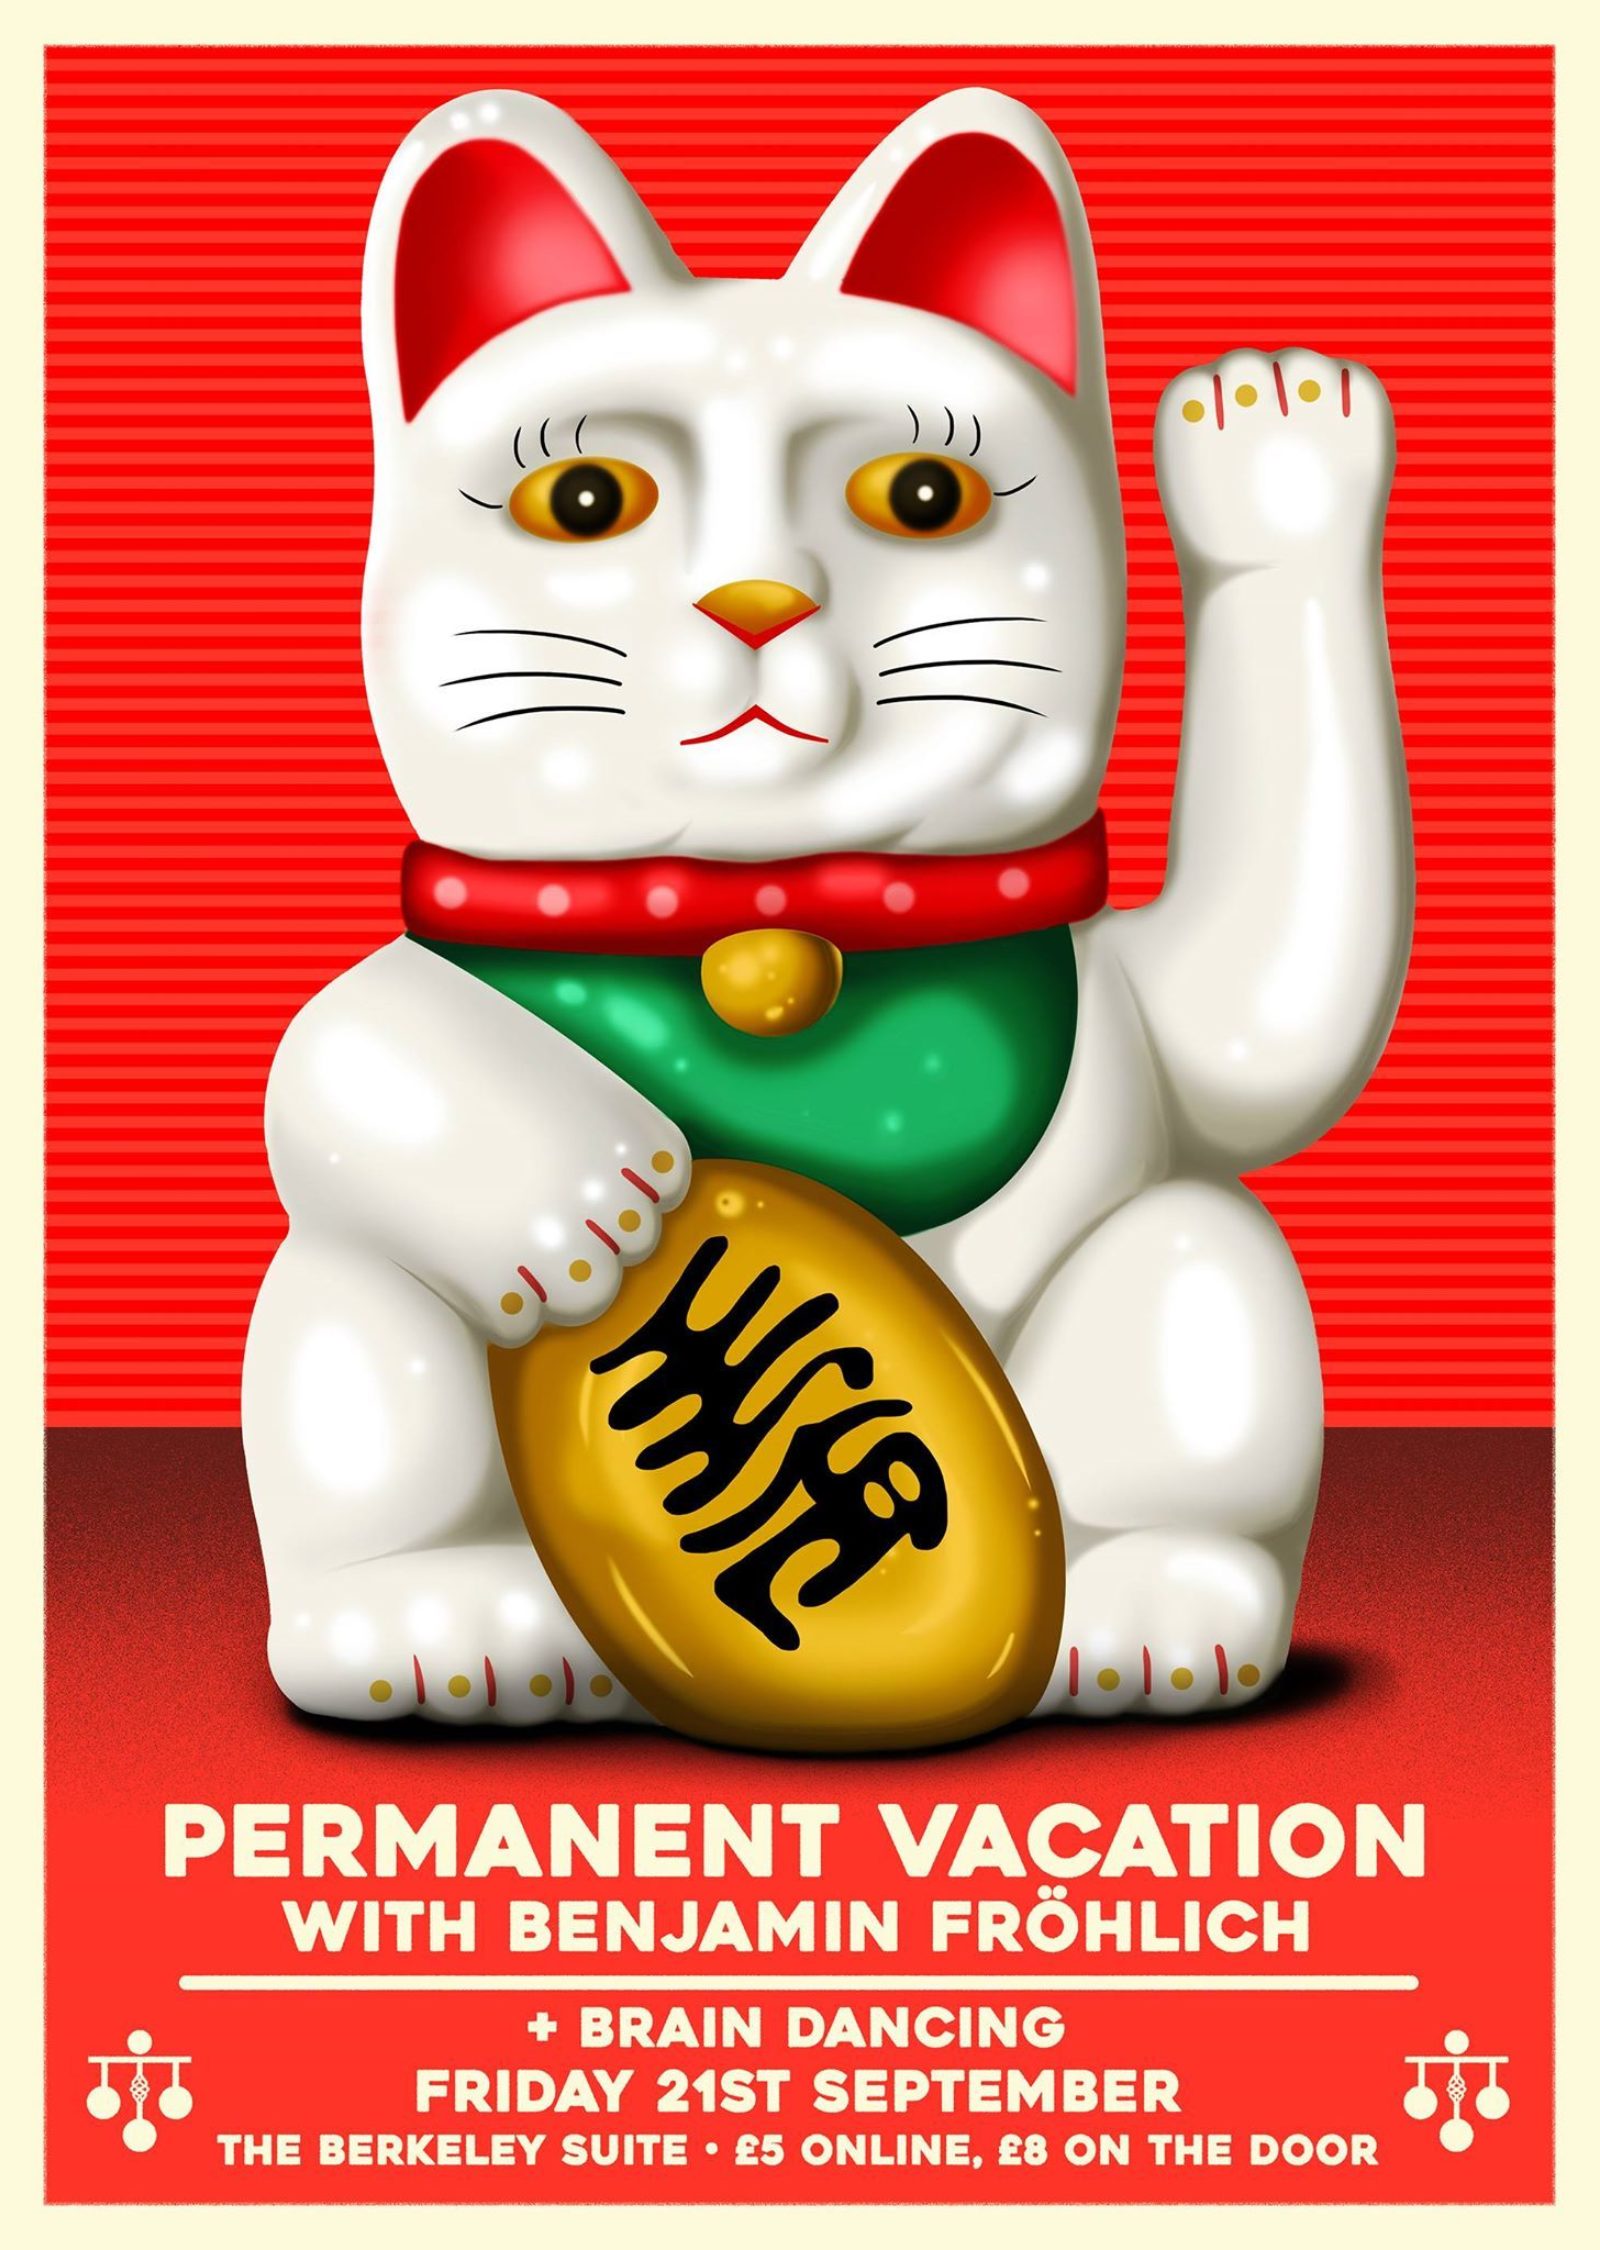 Permanent Vacation with Benjamin Frohlich